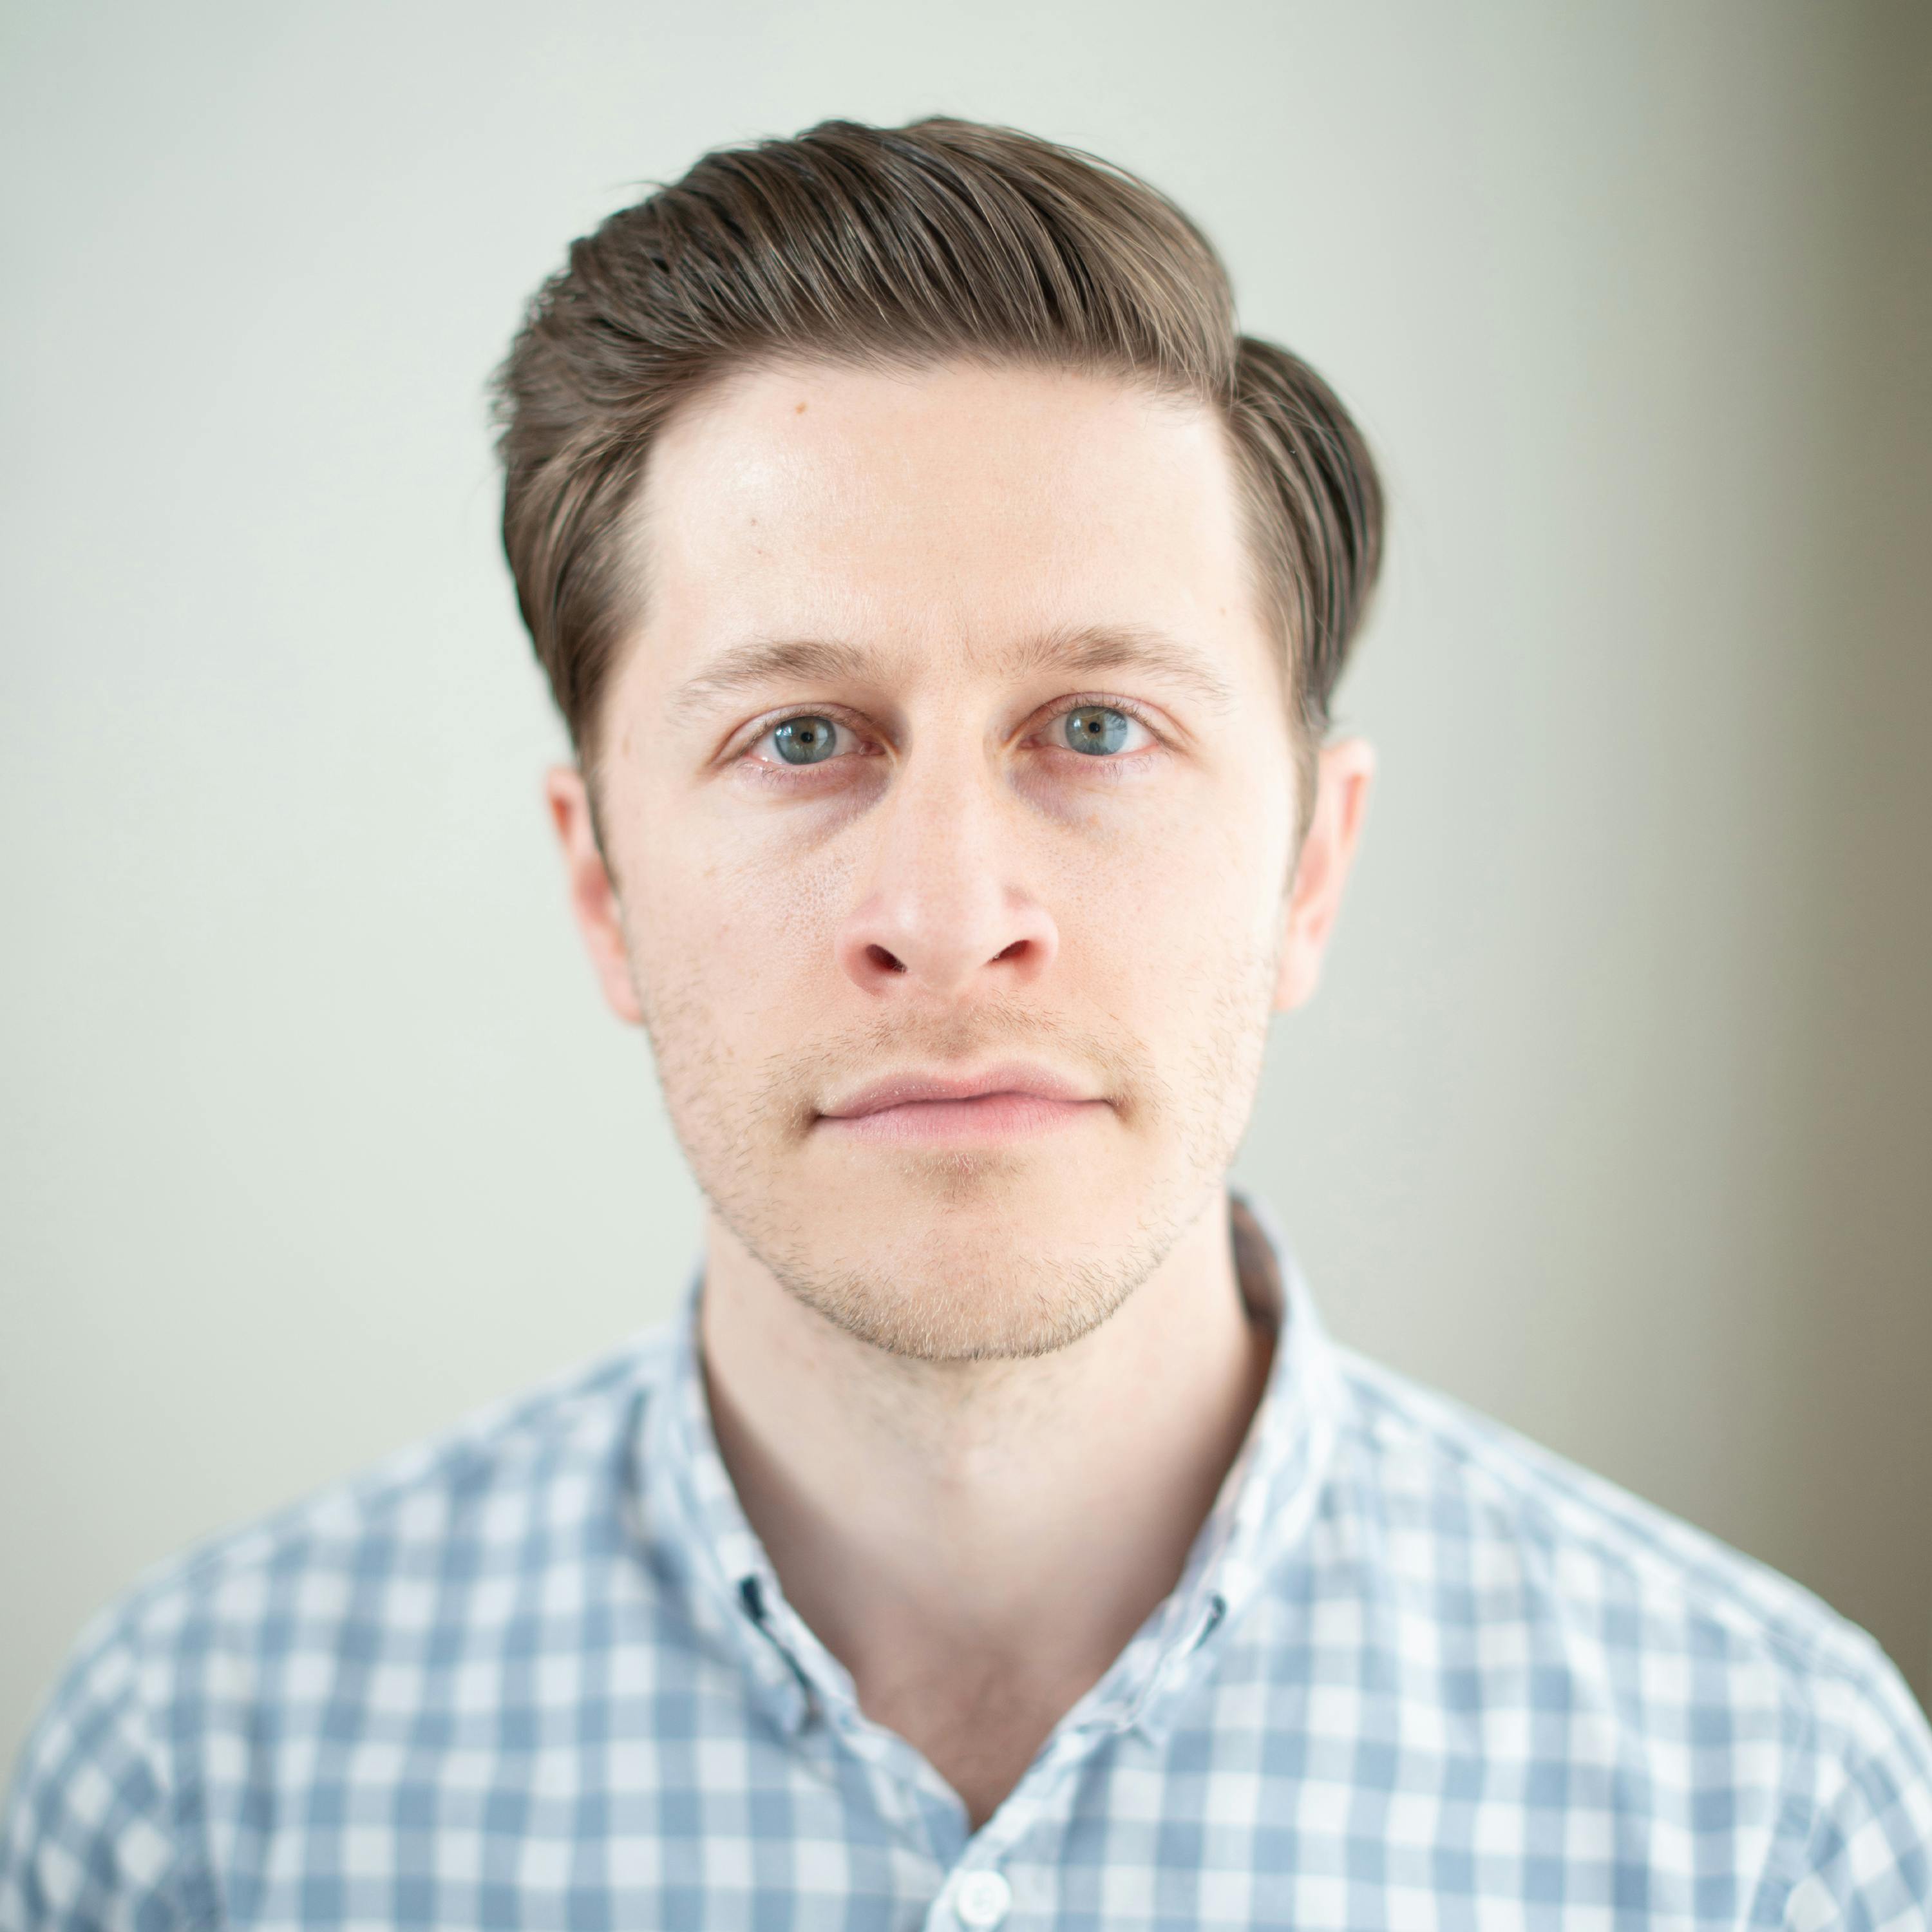 A headshot photograph of David Pakman, a progressive American talk show host and commentator. Pakman is shown facing the camera with a serious expression, wearing a dark suit and a light blue shirt. He has short brown hair and is seated against a light grey background.